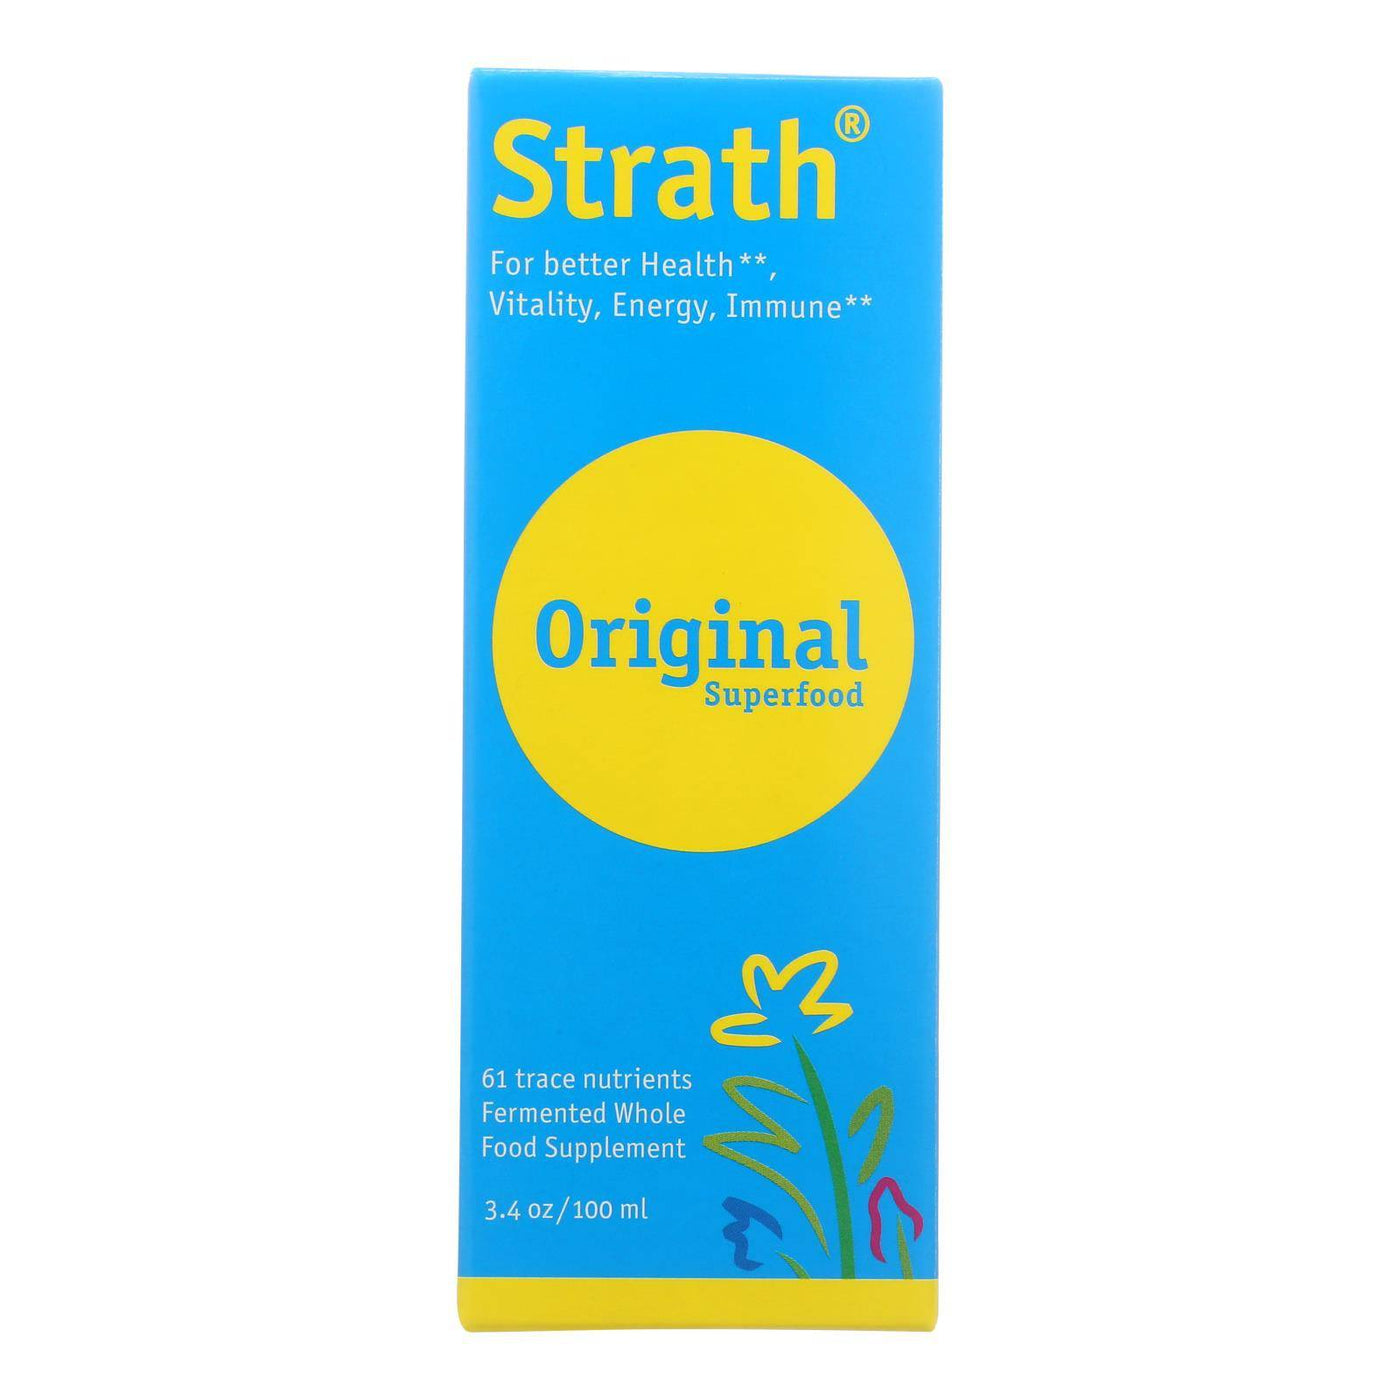 Buy Bio-strath Whole Food Supplement - Stress And Fatigue Formula - 3.4 Oz  at OnlyNaturals.us